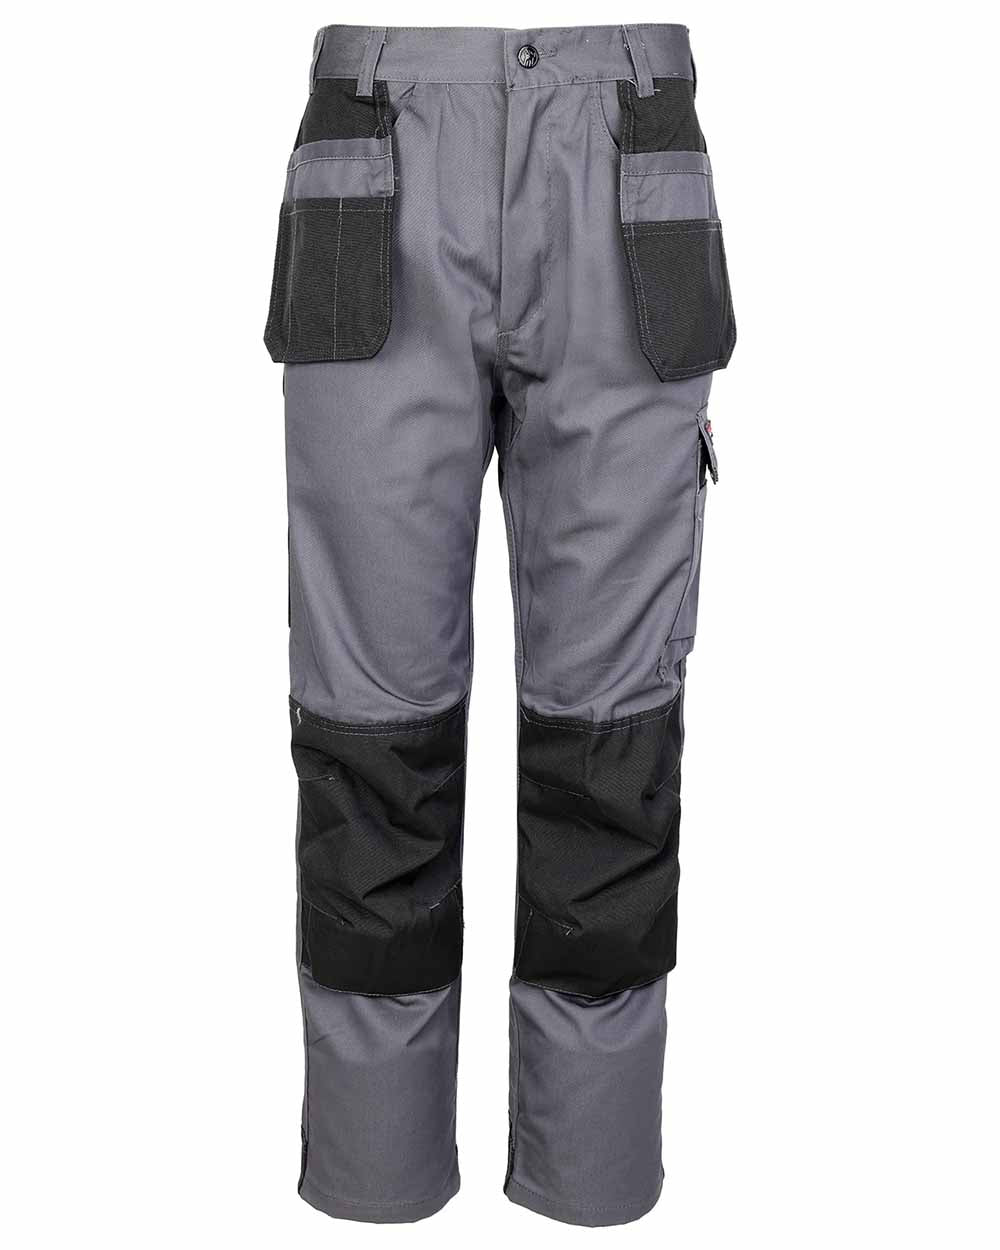 TuffStuff Excel Work Trousers in Grey  with pockets out 